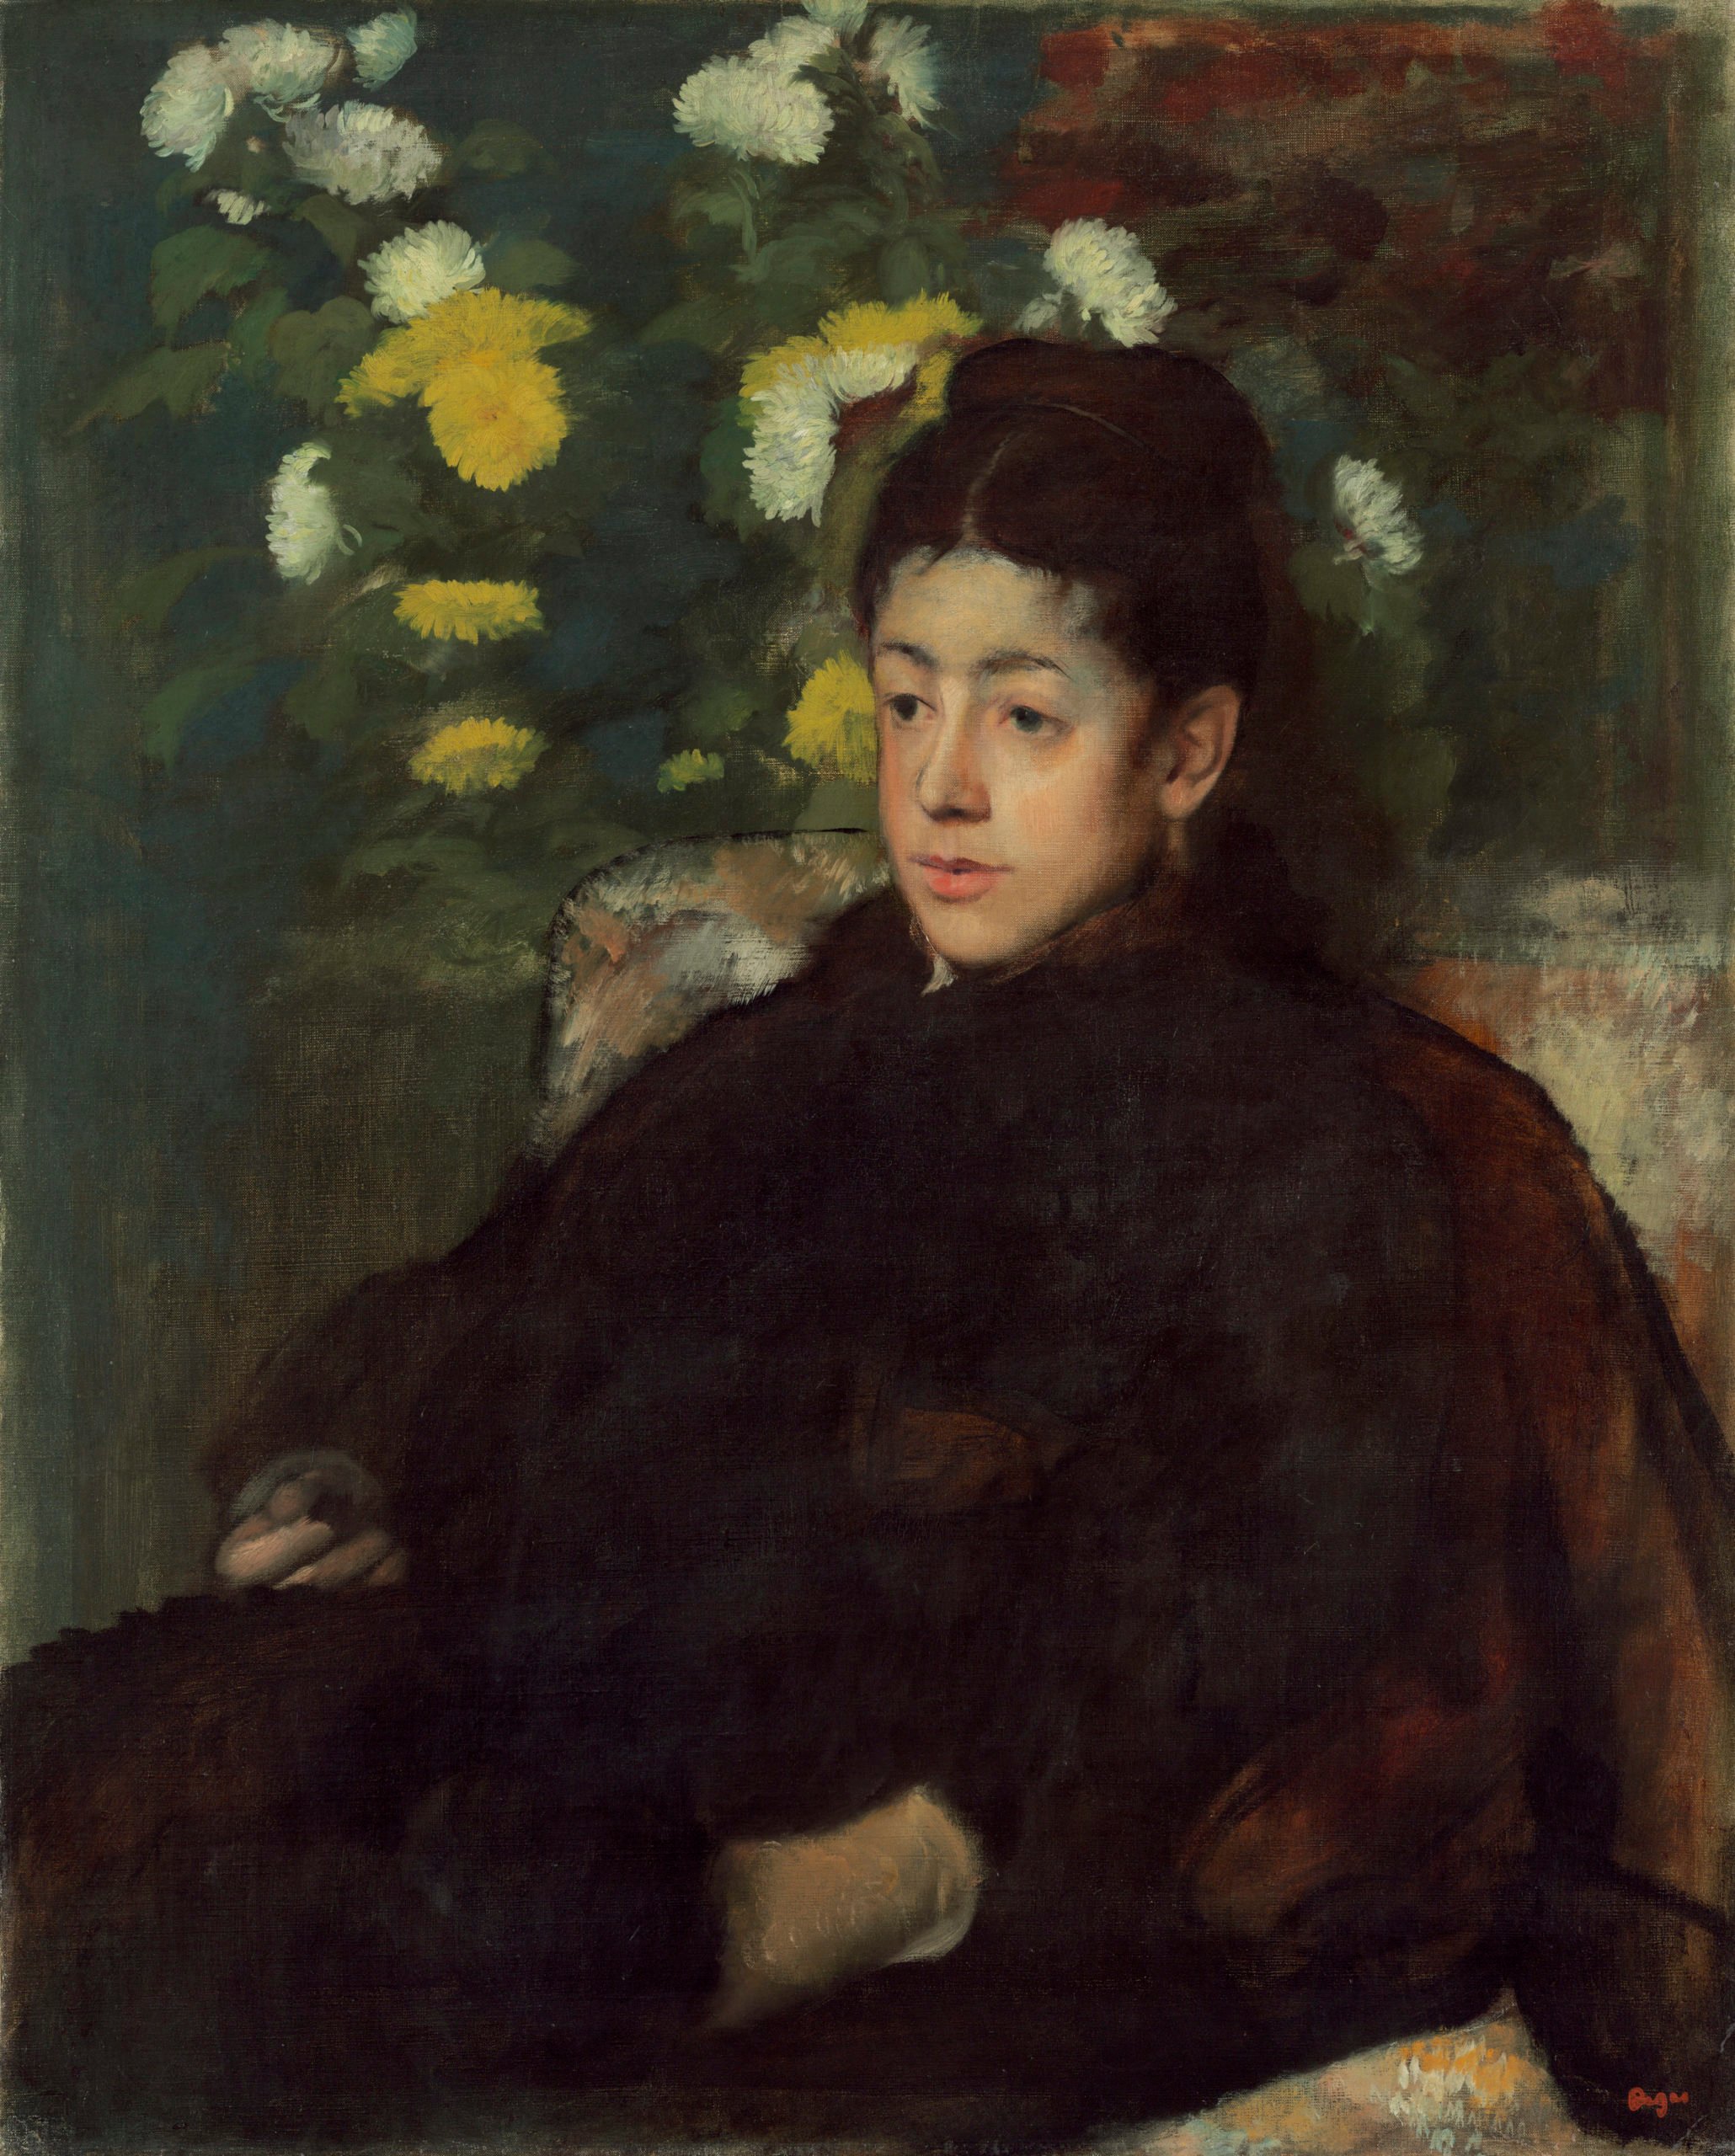 “Mademoiselle Malo” by Degas courtesy of National Gallery of Art, Chester Dale Collection